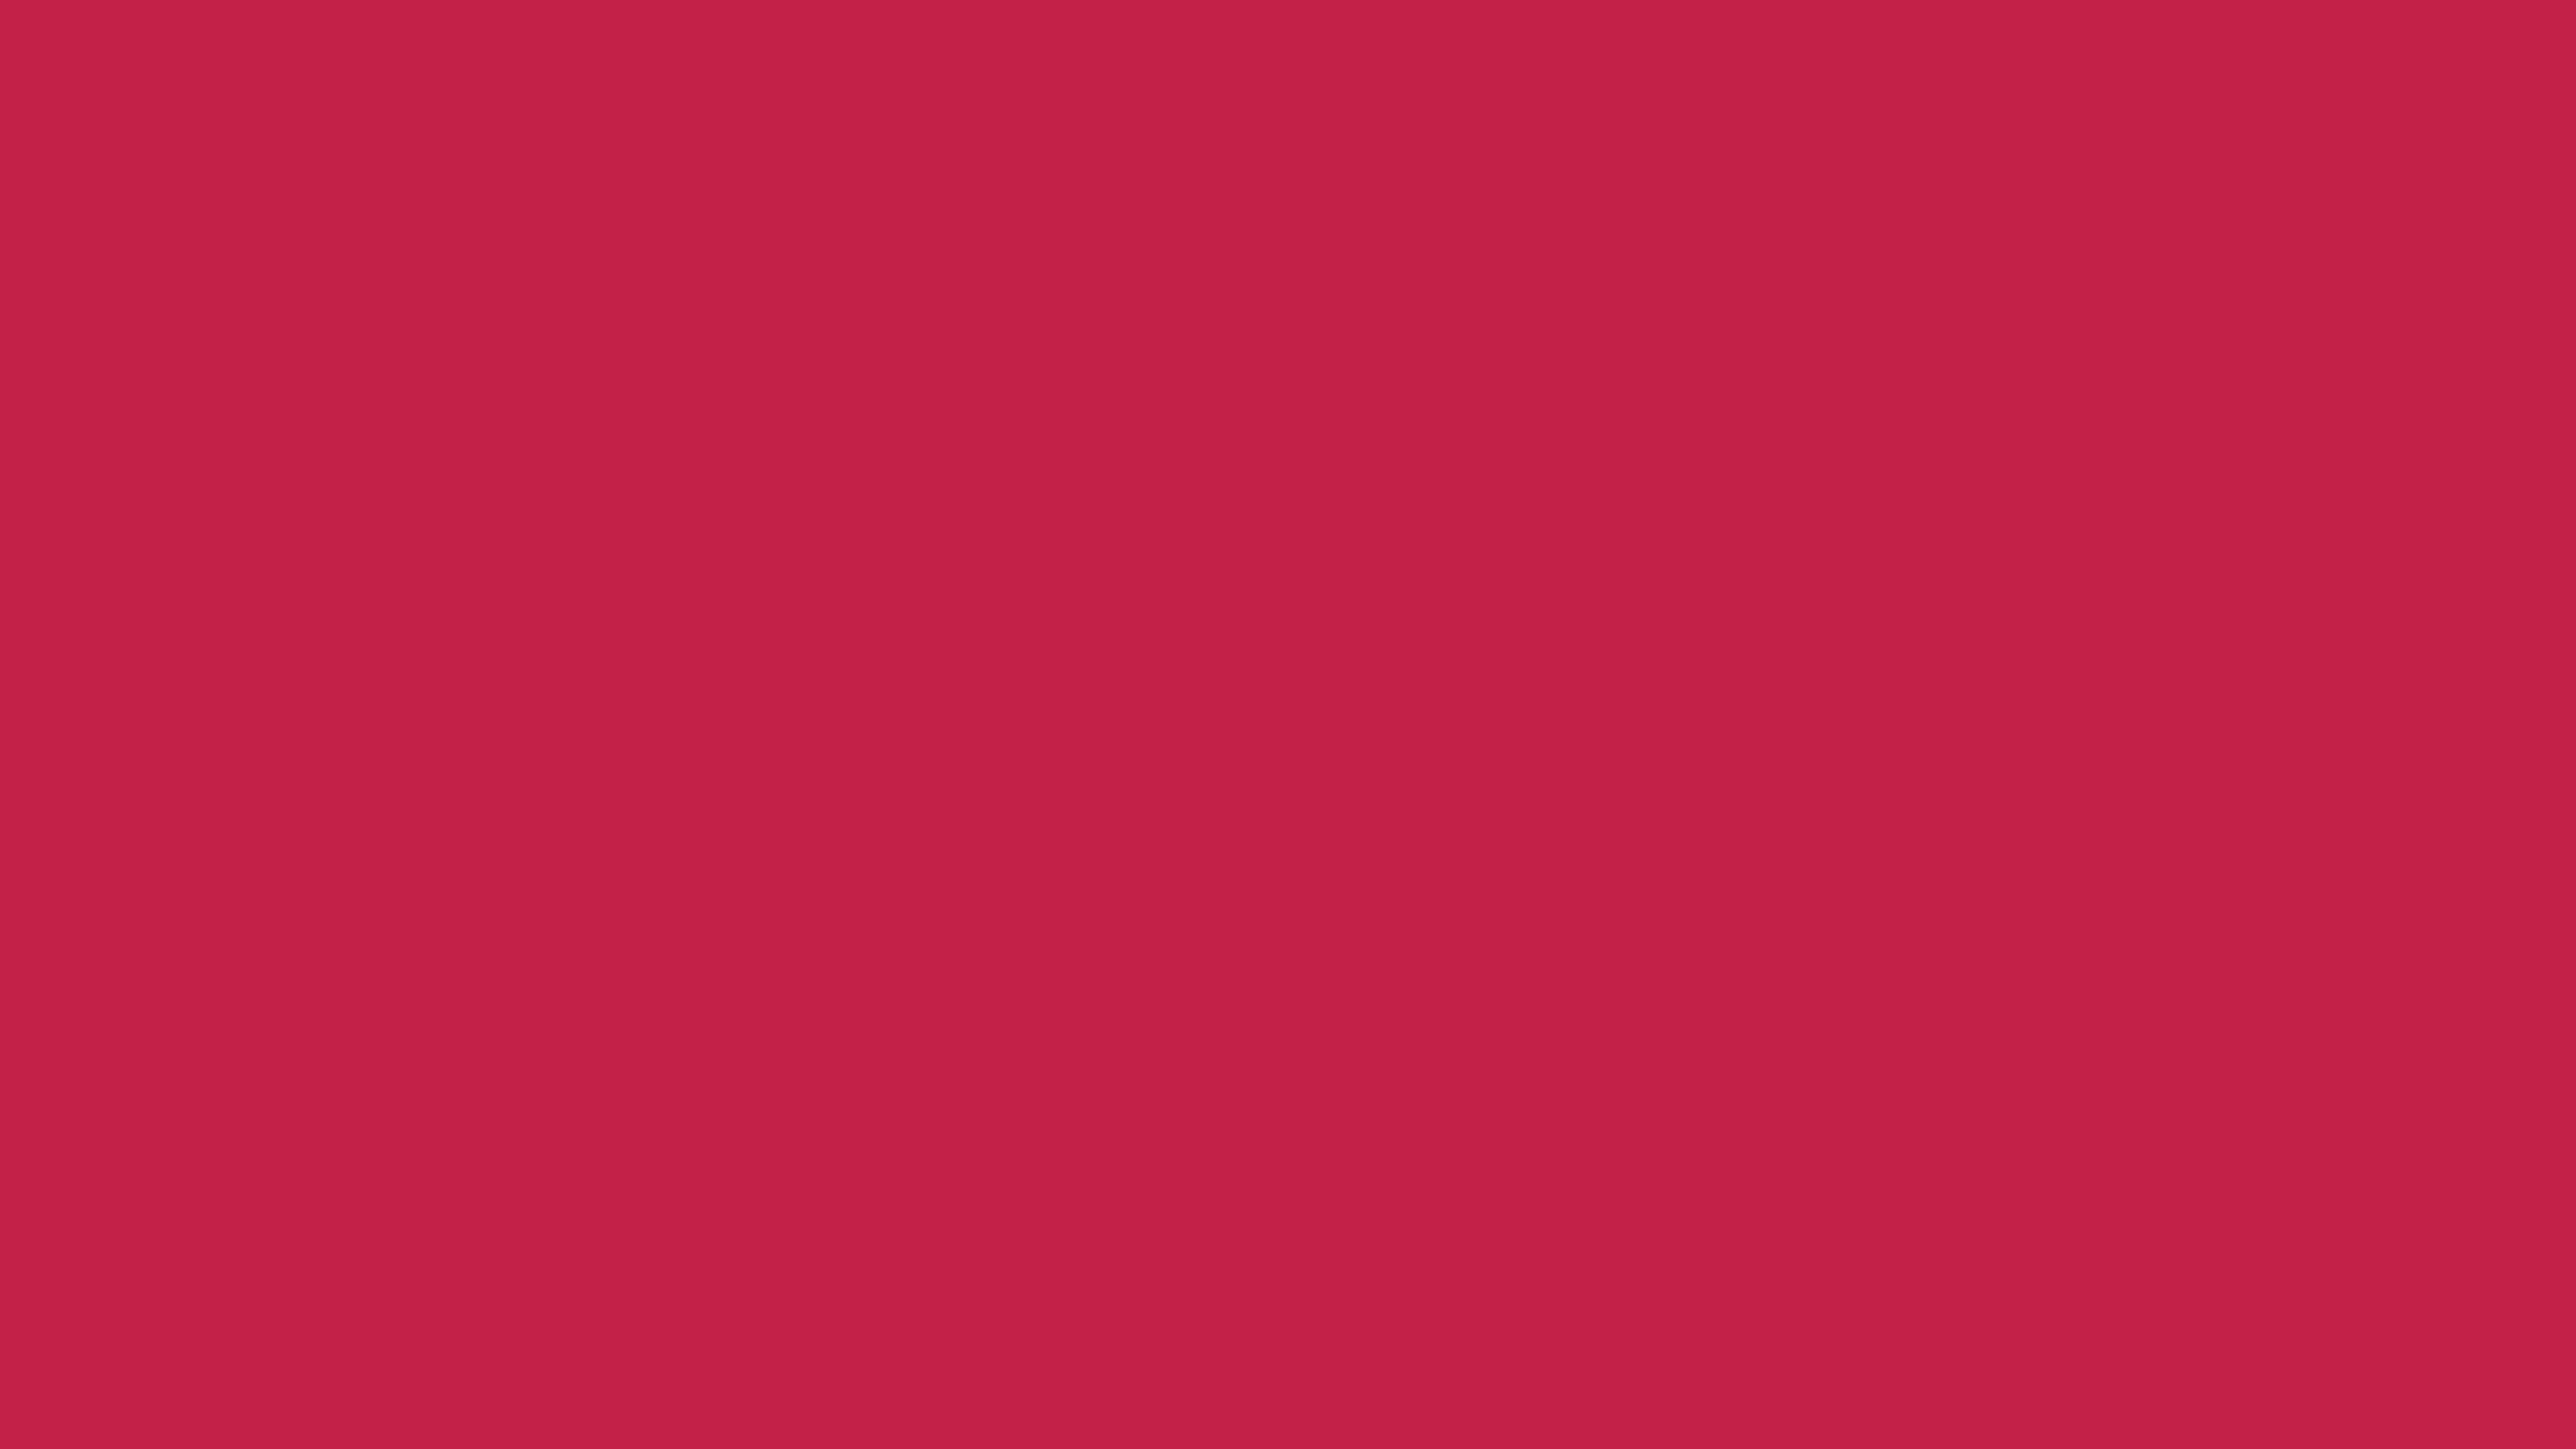 7680x4320 Bright Maroon Solid Color Background